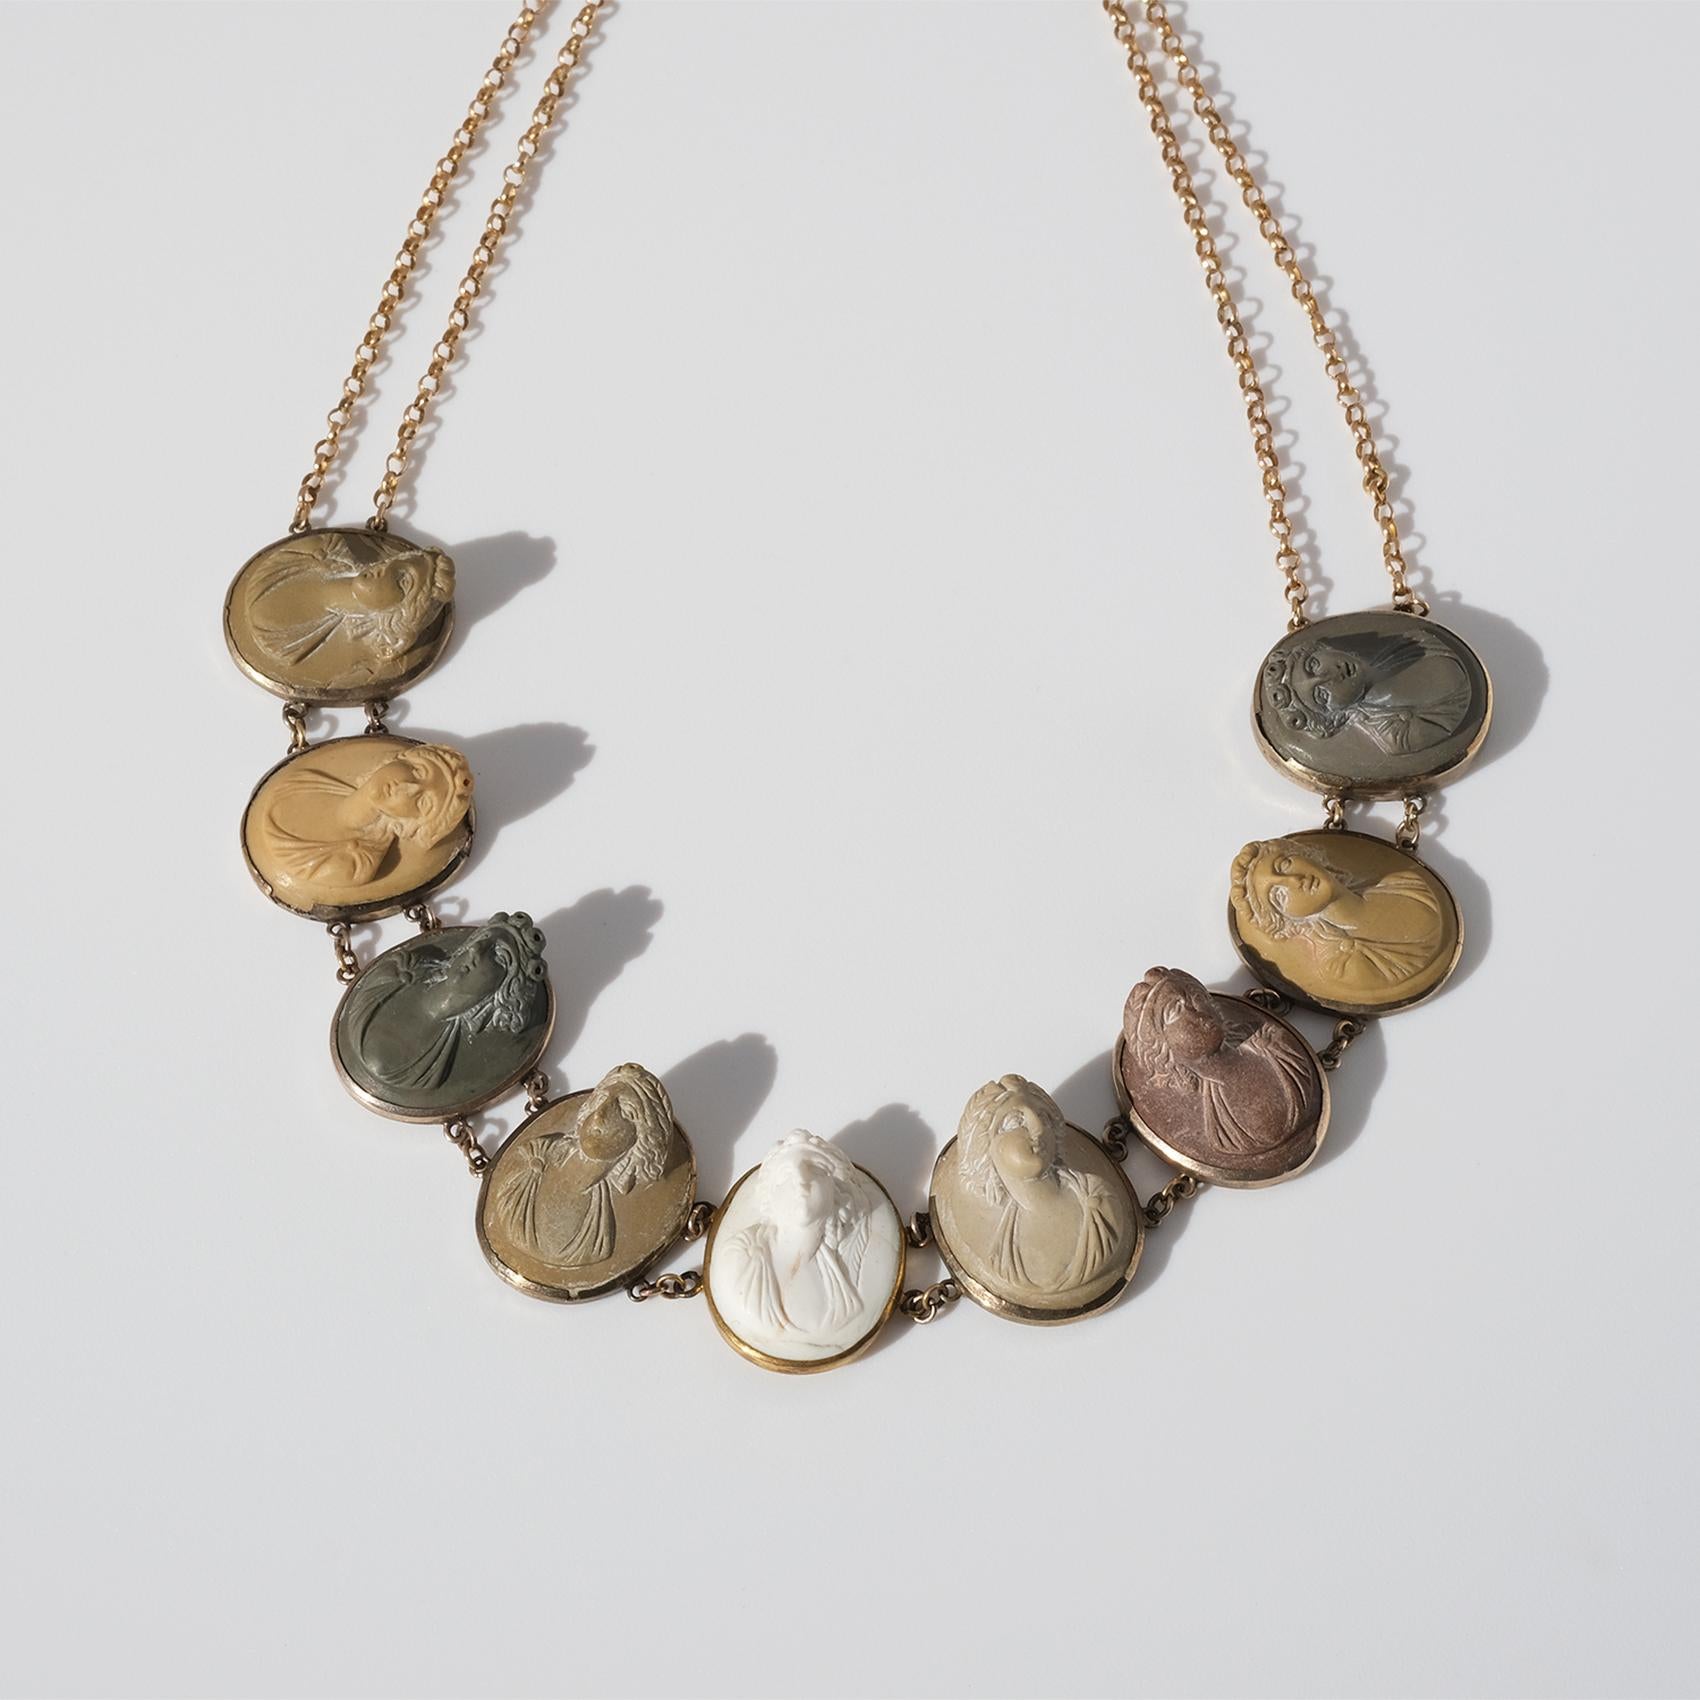 The necklace radiates history and mystery. The lava rocks follow the colors of nature, being beige, olive green, different shades of grey, earth red and white and will be a perfect match to a summer khaki-look.   

Have you seen the bracelet that